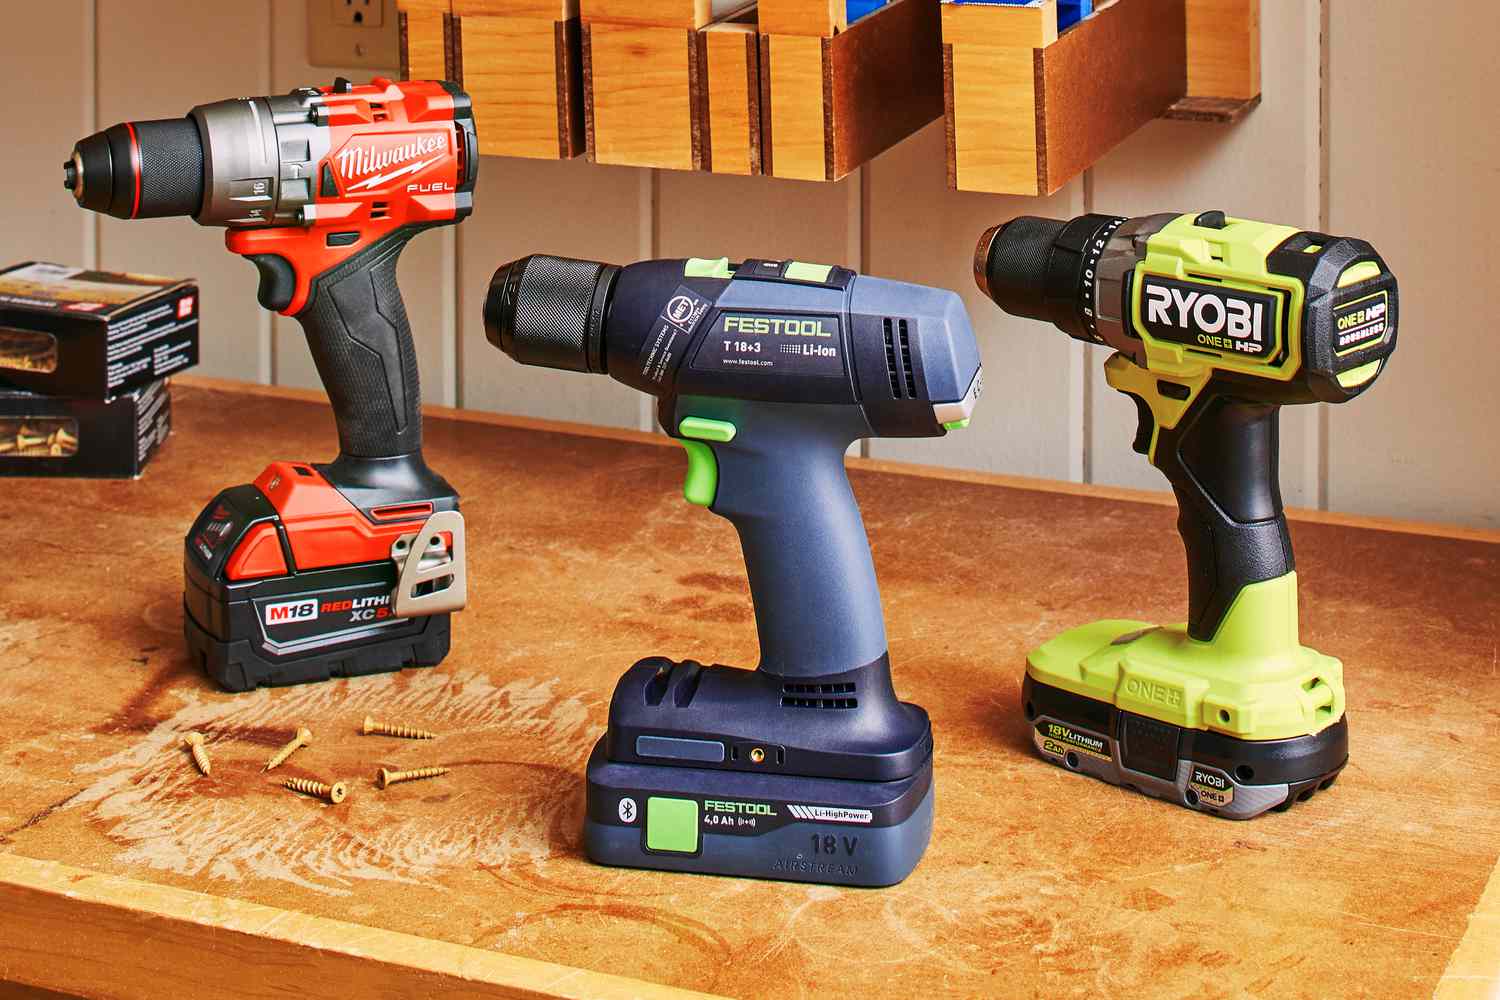 How to Determine the Right Cordless Power Tool for Various Construction Materials?